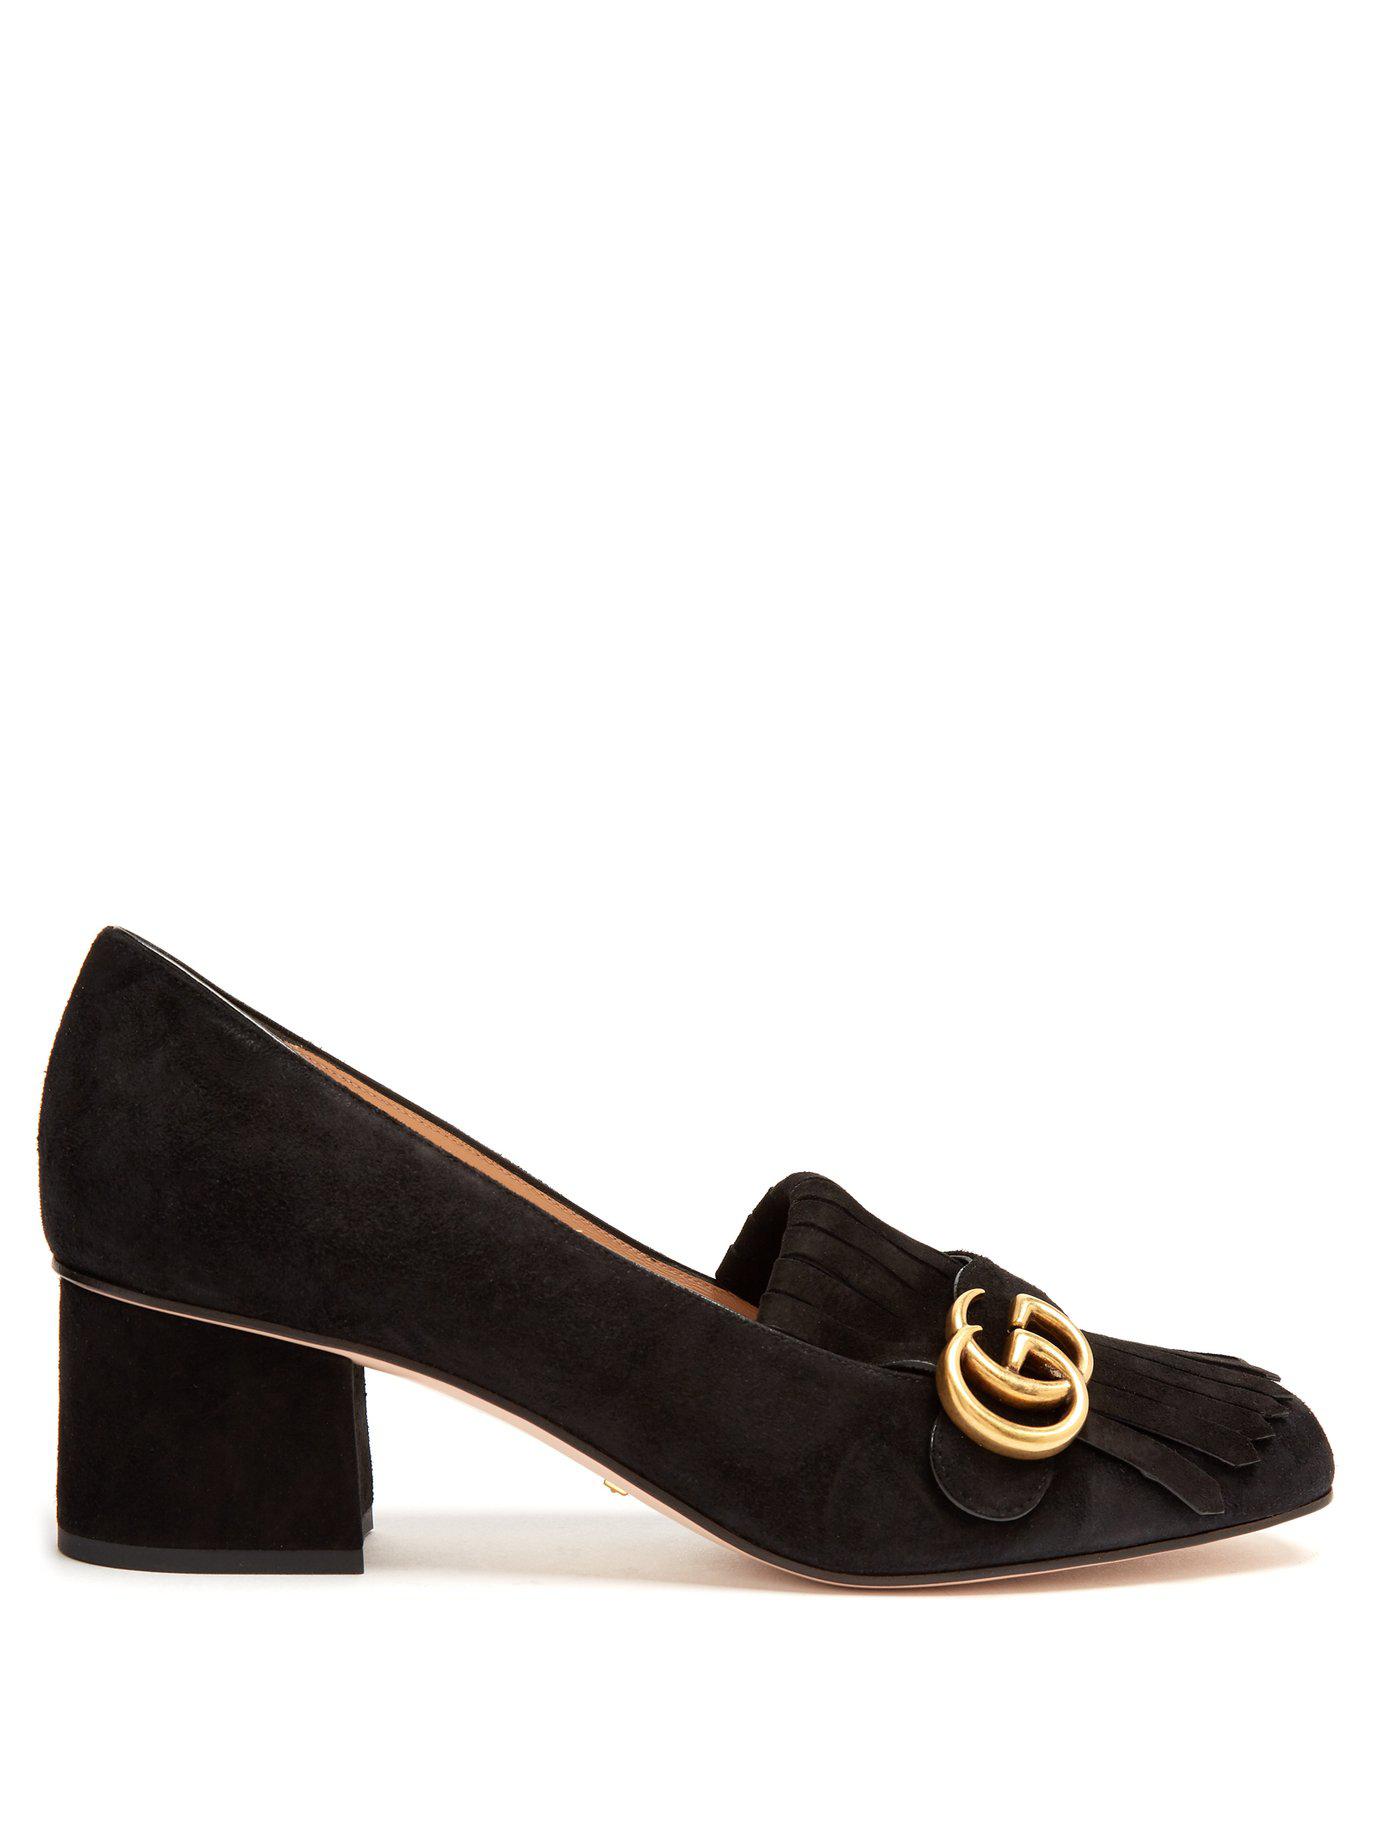 Gucci Marmont Fringed Suede Loafers in Black - Save 6% - Lyst